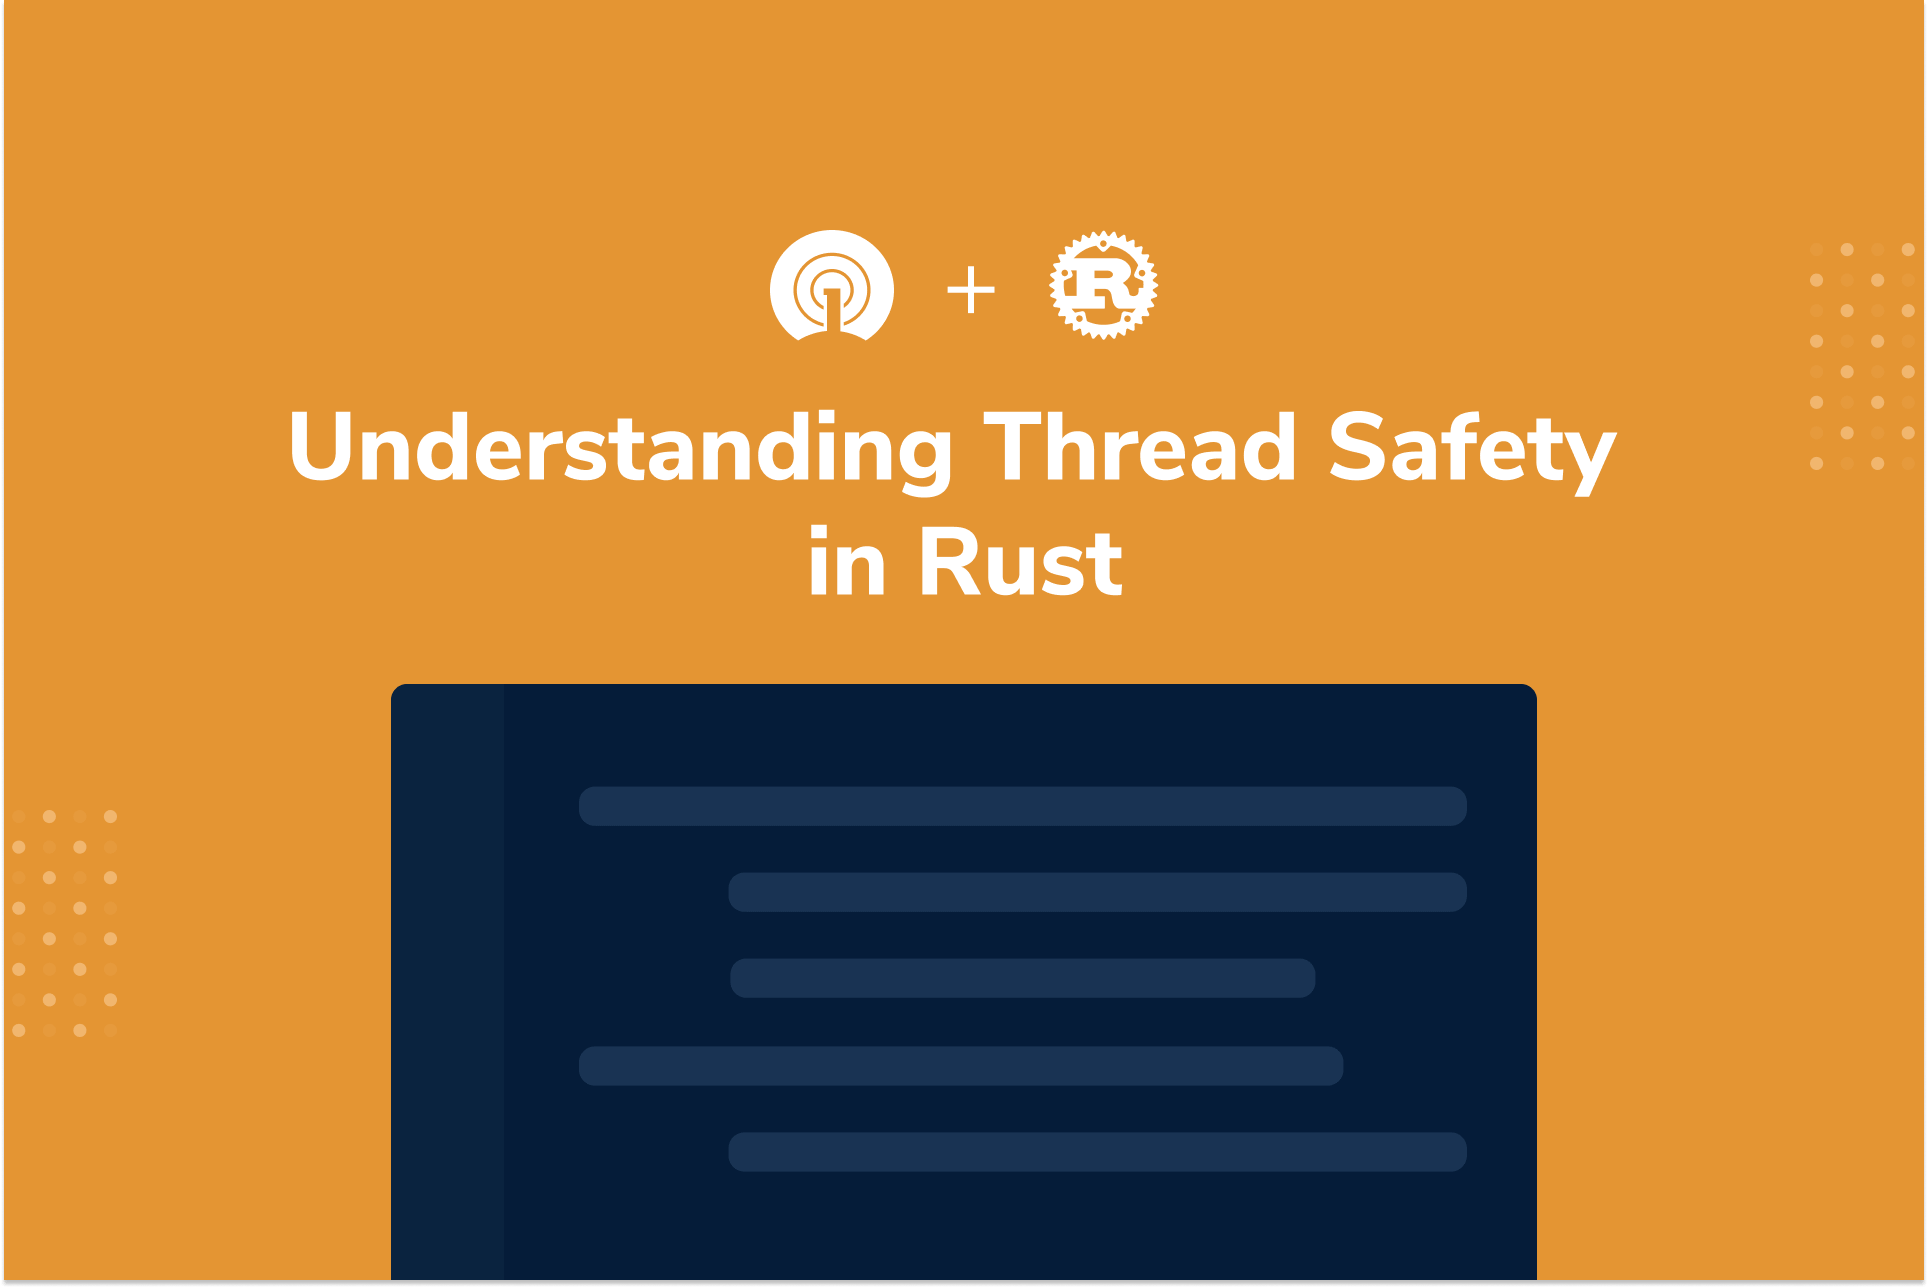 Thread safety and Learning in Rust